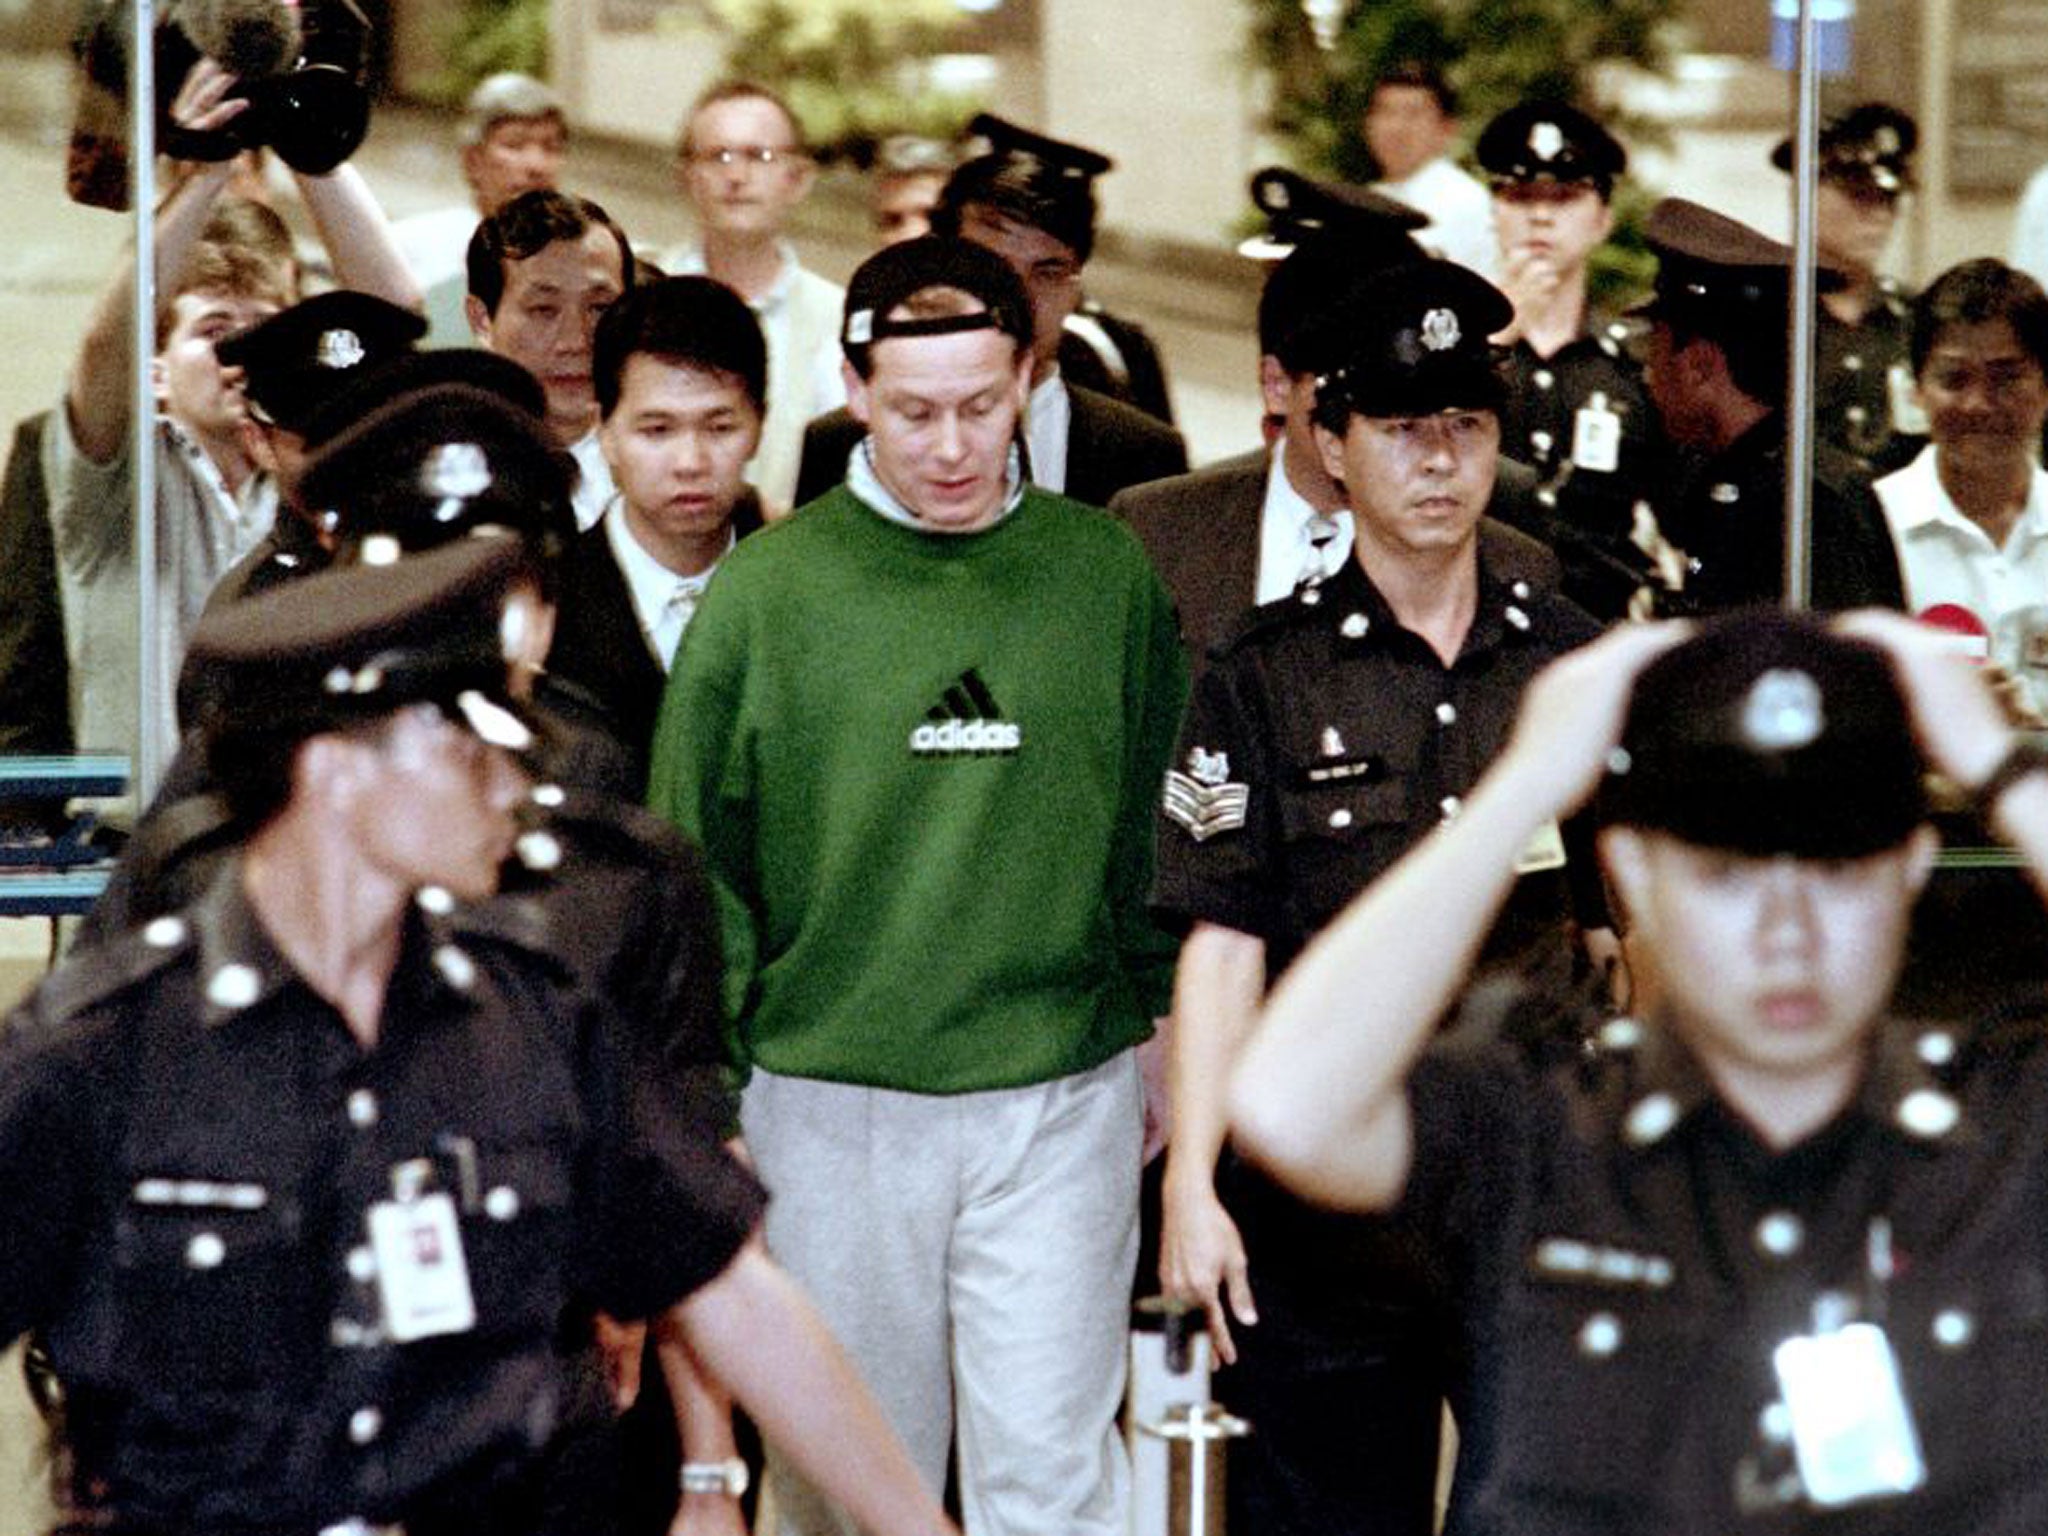 Nick Leeson arrives back at Changi airport in November 1995 after being extradited from Germany